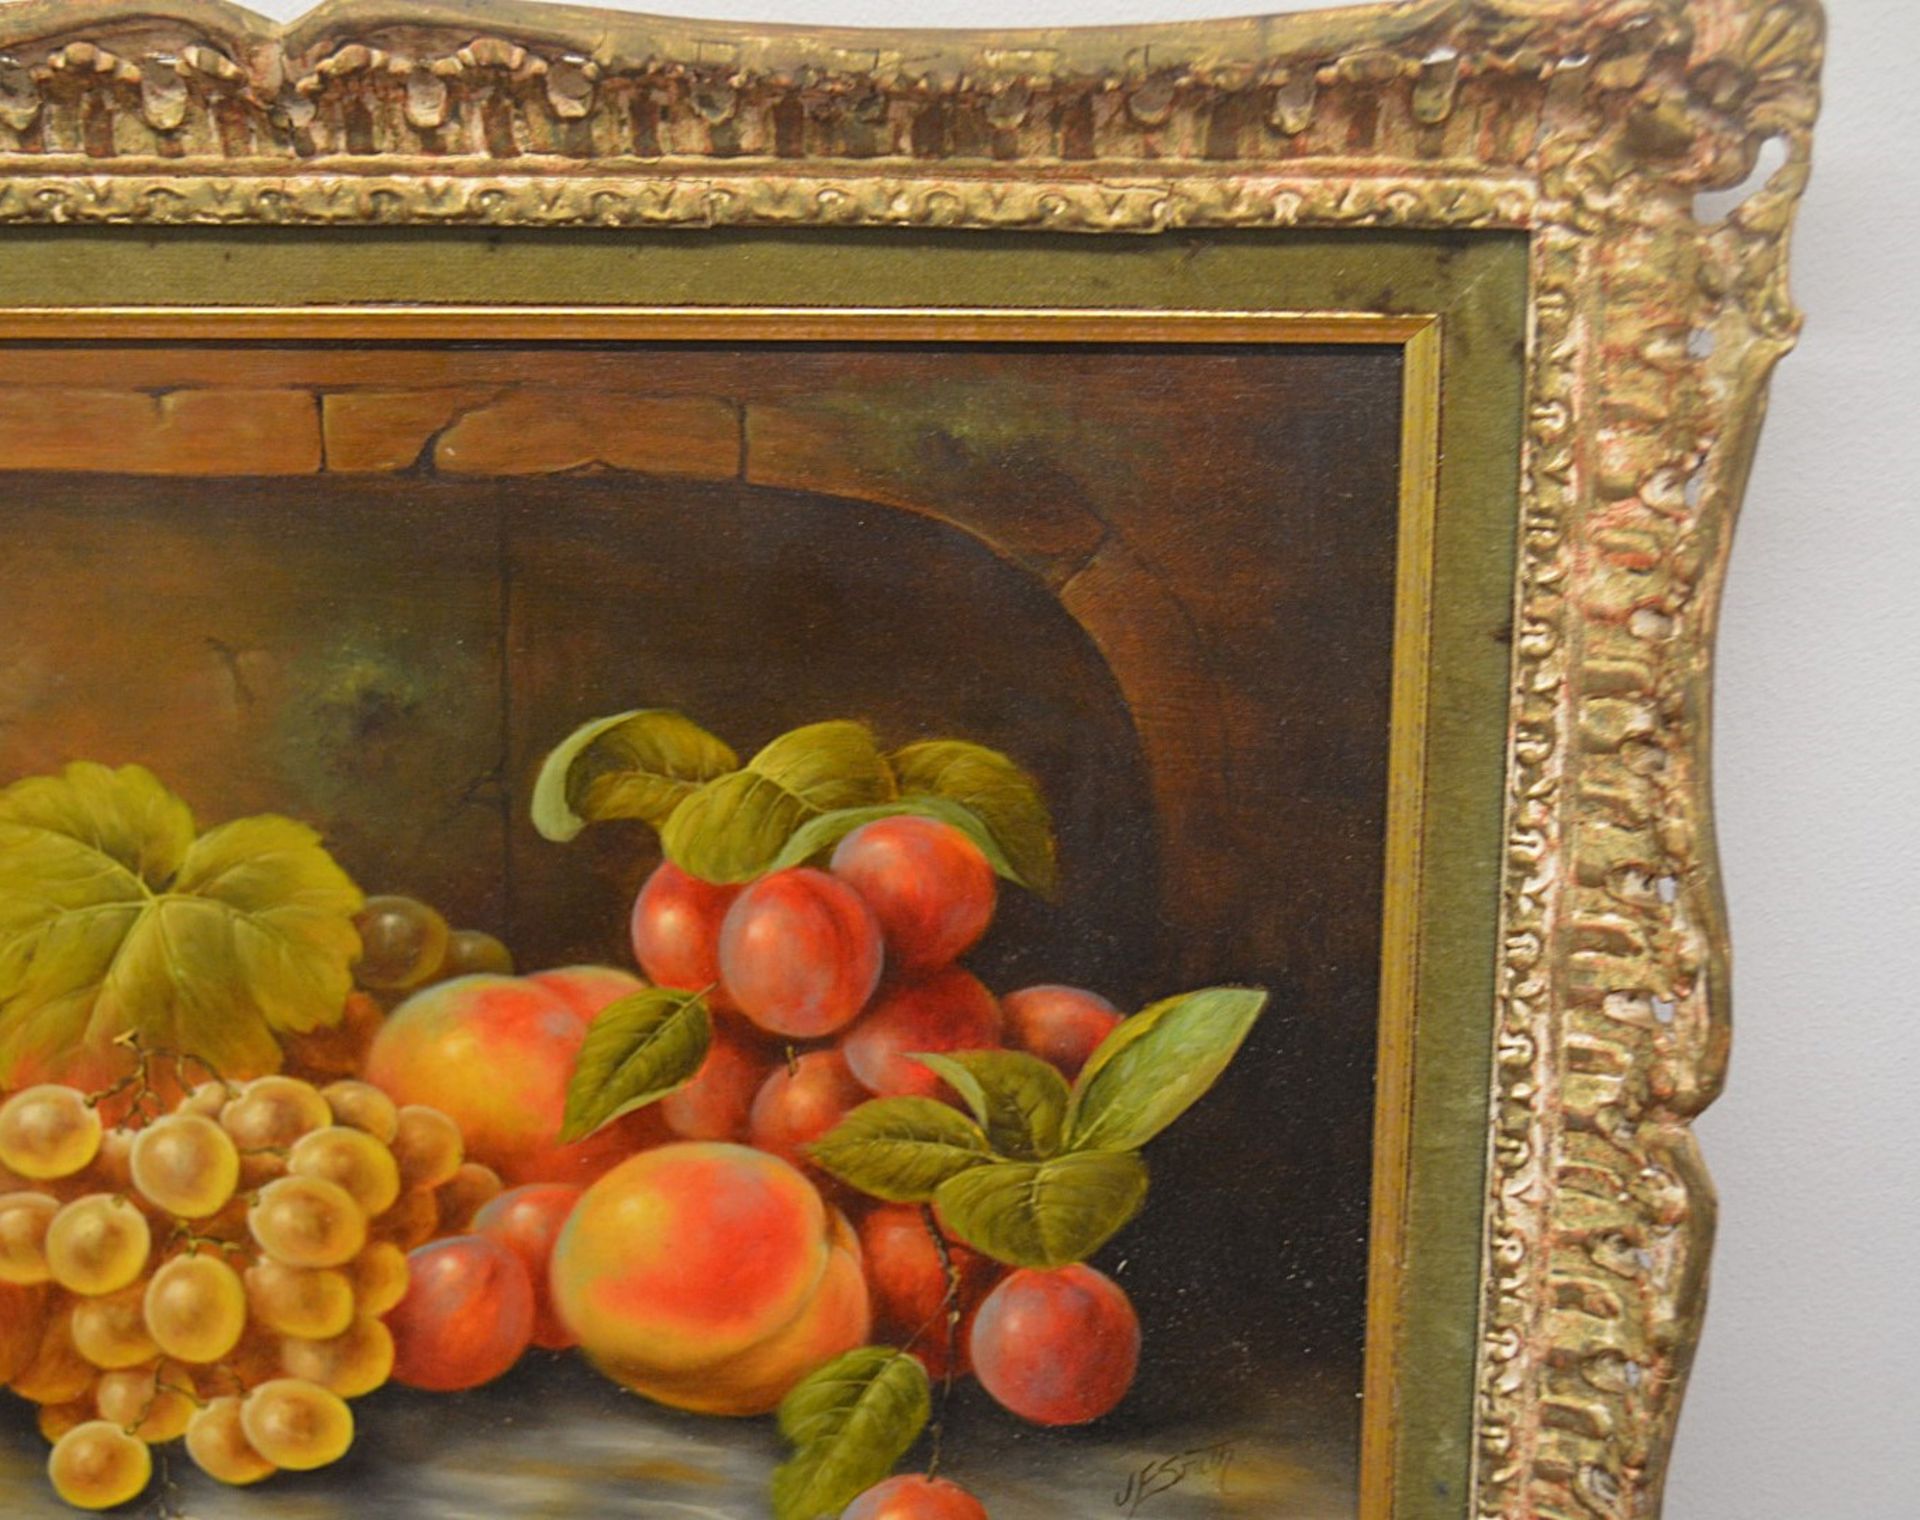 1 x Framed Picture Of Fruit - Dimensions: 52 x 42cm - Ref: MD165 / WH1 D-OFF - Pre-owned, From A - Image 7 of 7